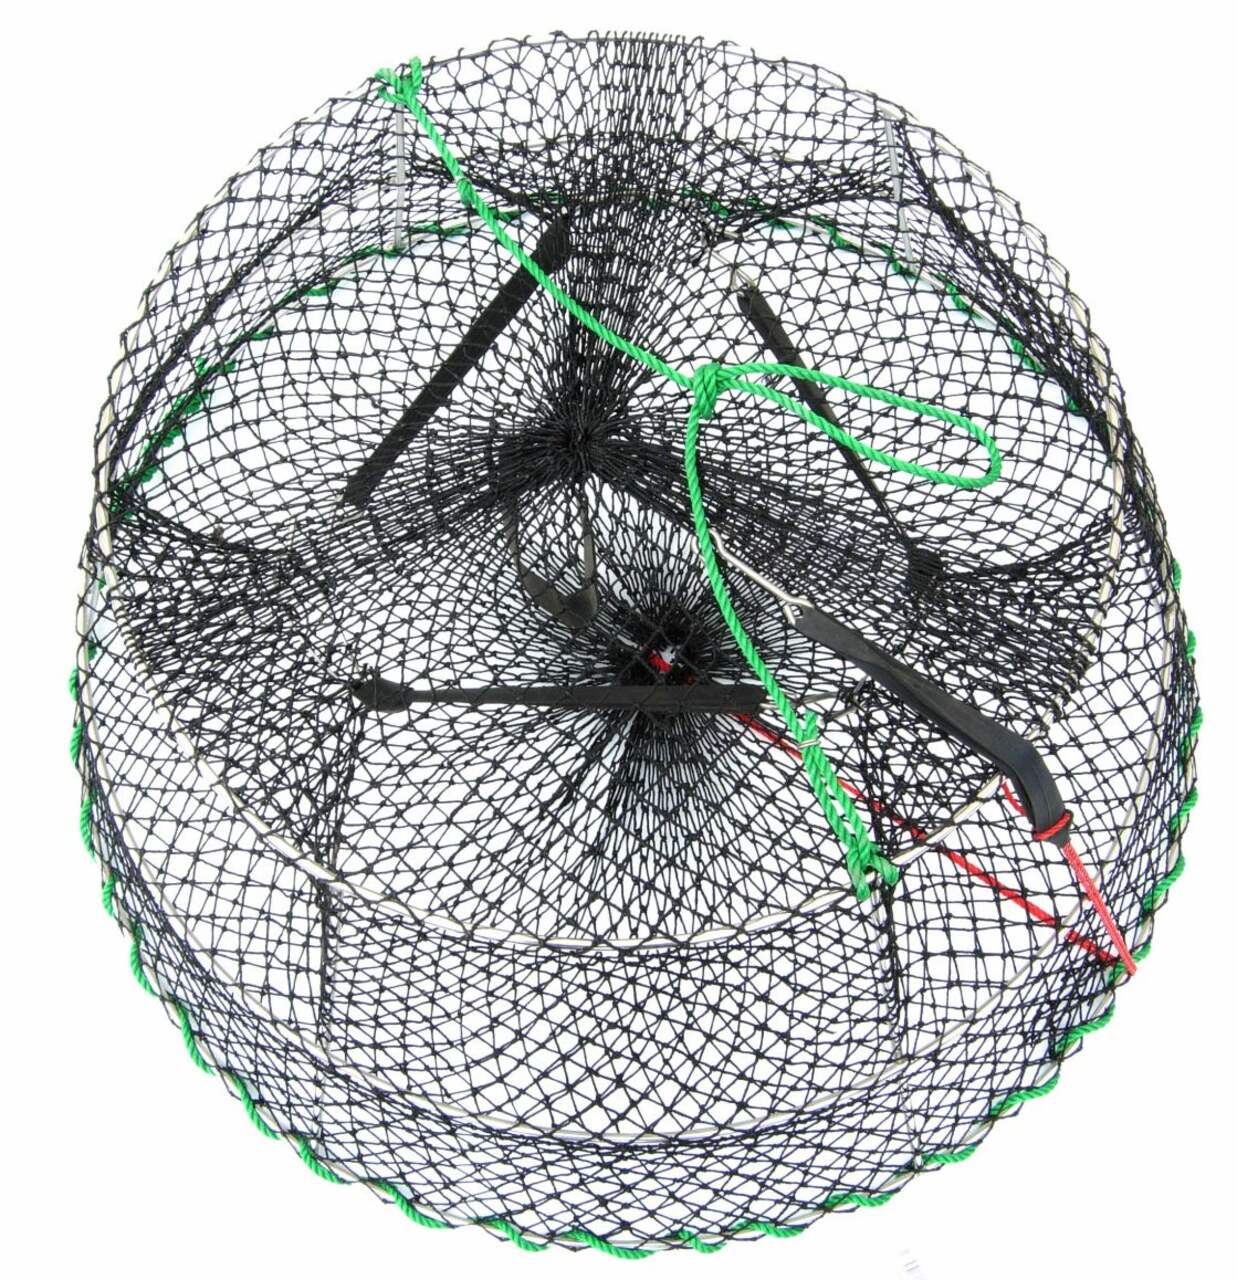 Hot Sale Long Train Fishing Trap for Crab Lobster Shrimp on Sale Sections  Folding Rectangle - China Net and Crab Trap price